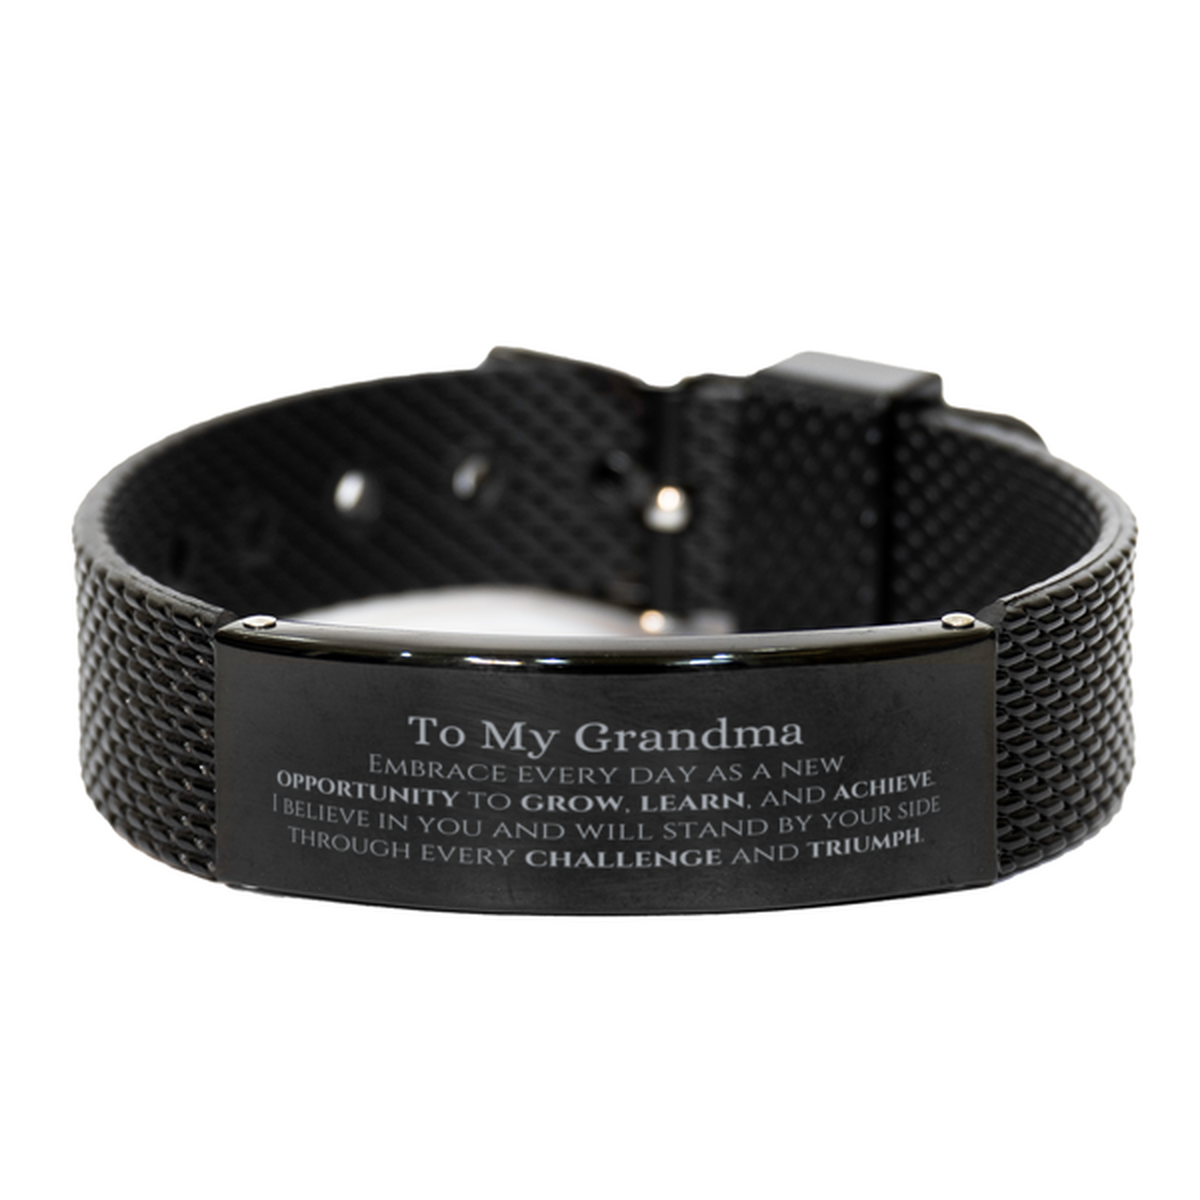 To My Grandma Gifts, I believe in you and will stand by your side, Inspirational Black Shark Mesh Bracelet For Grandma, Birthday Christmas Motivational Grandma Gifts